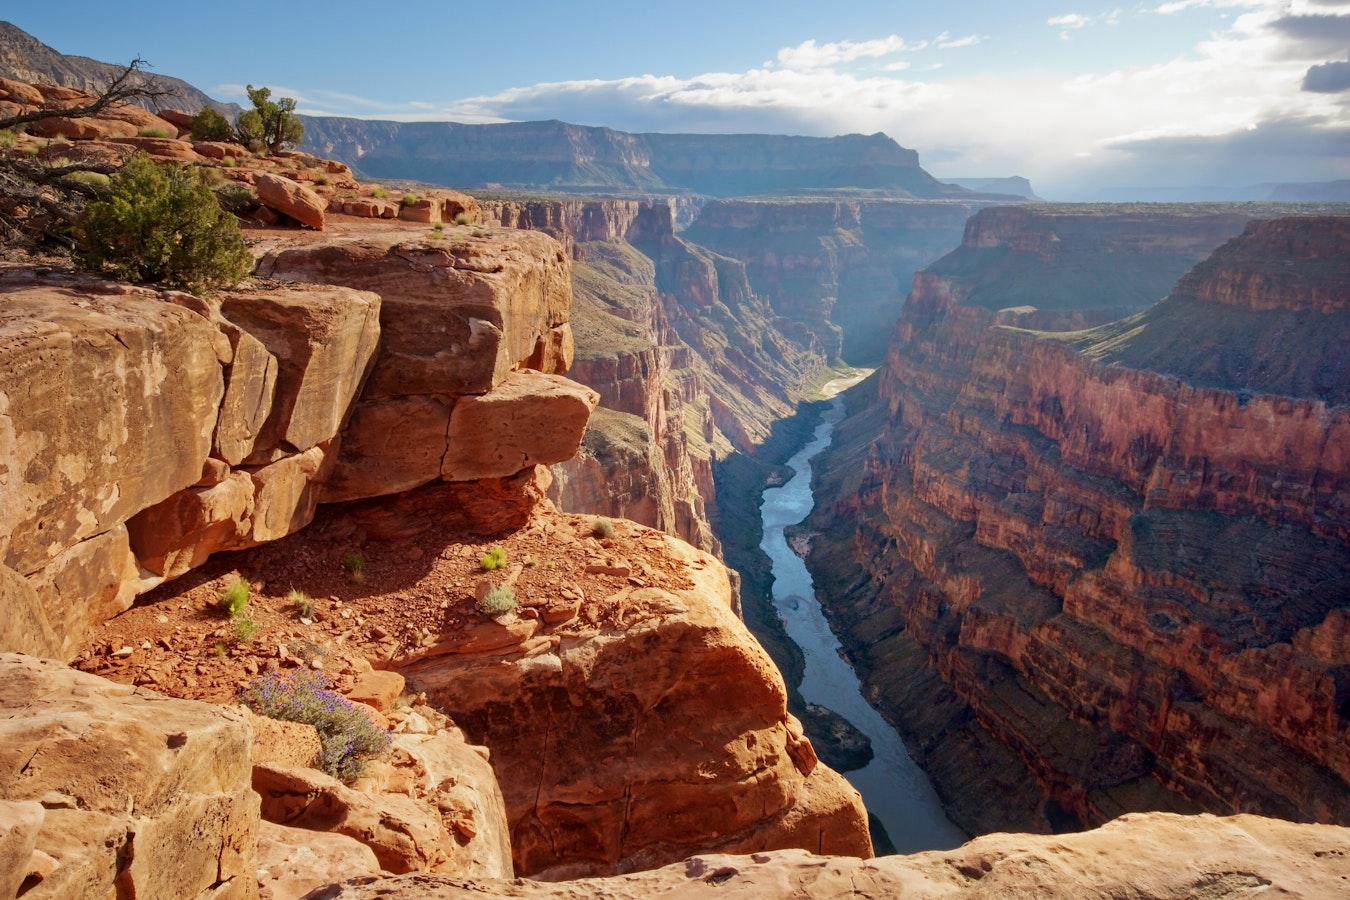 Why is the Grand Canyon important to humans?